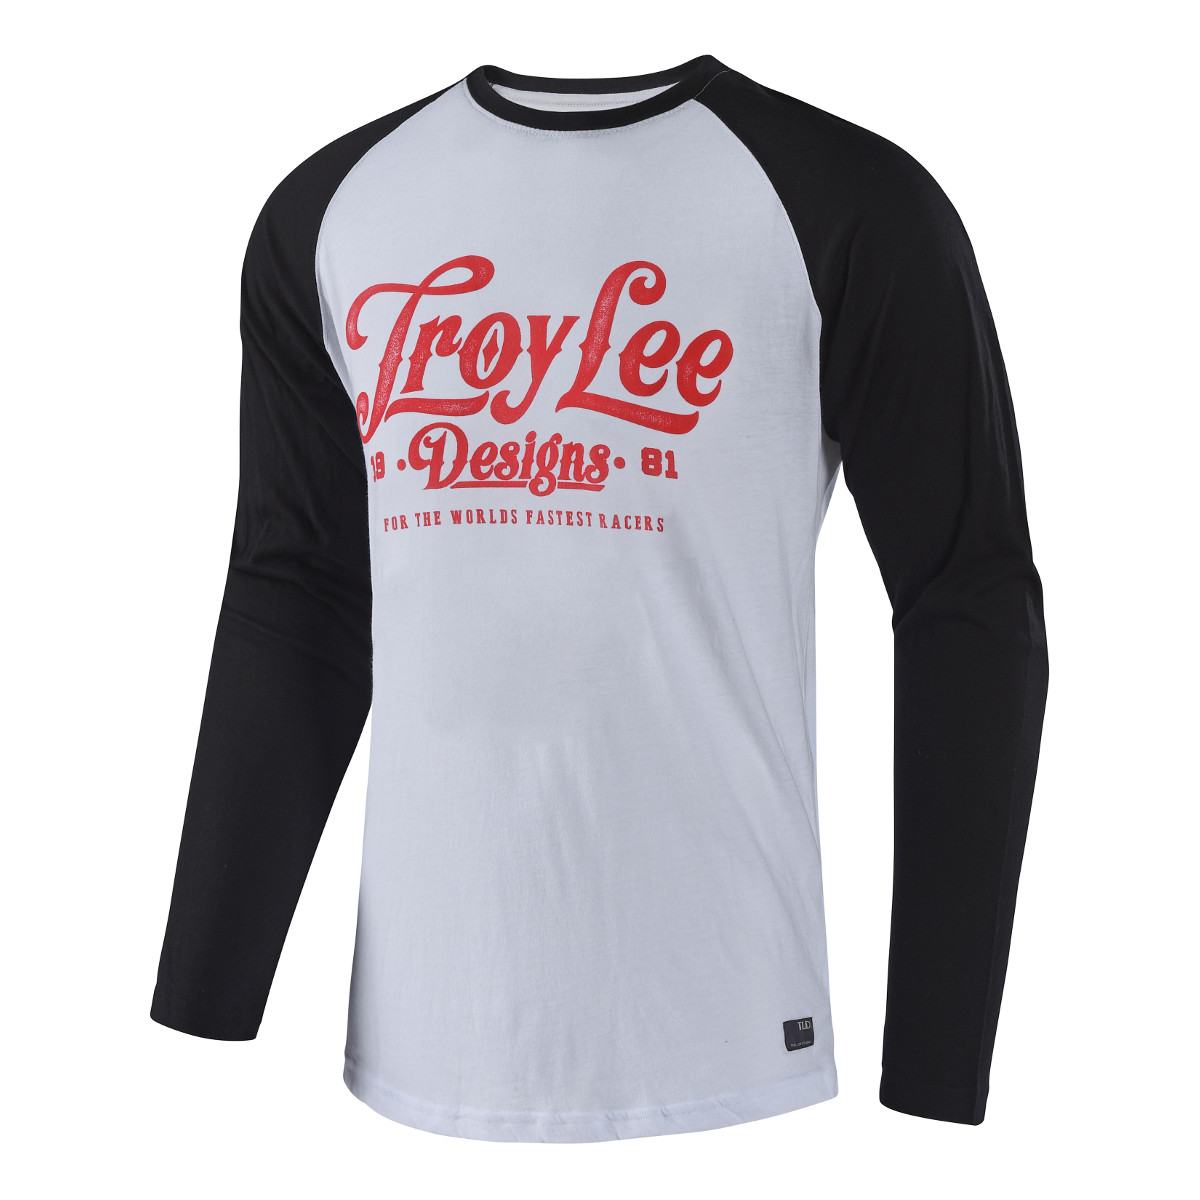 Troy Lee Designs Longsleeve Shirt Spiked White/Red